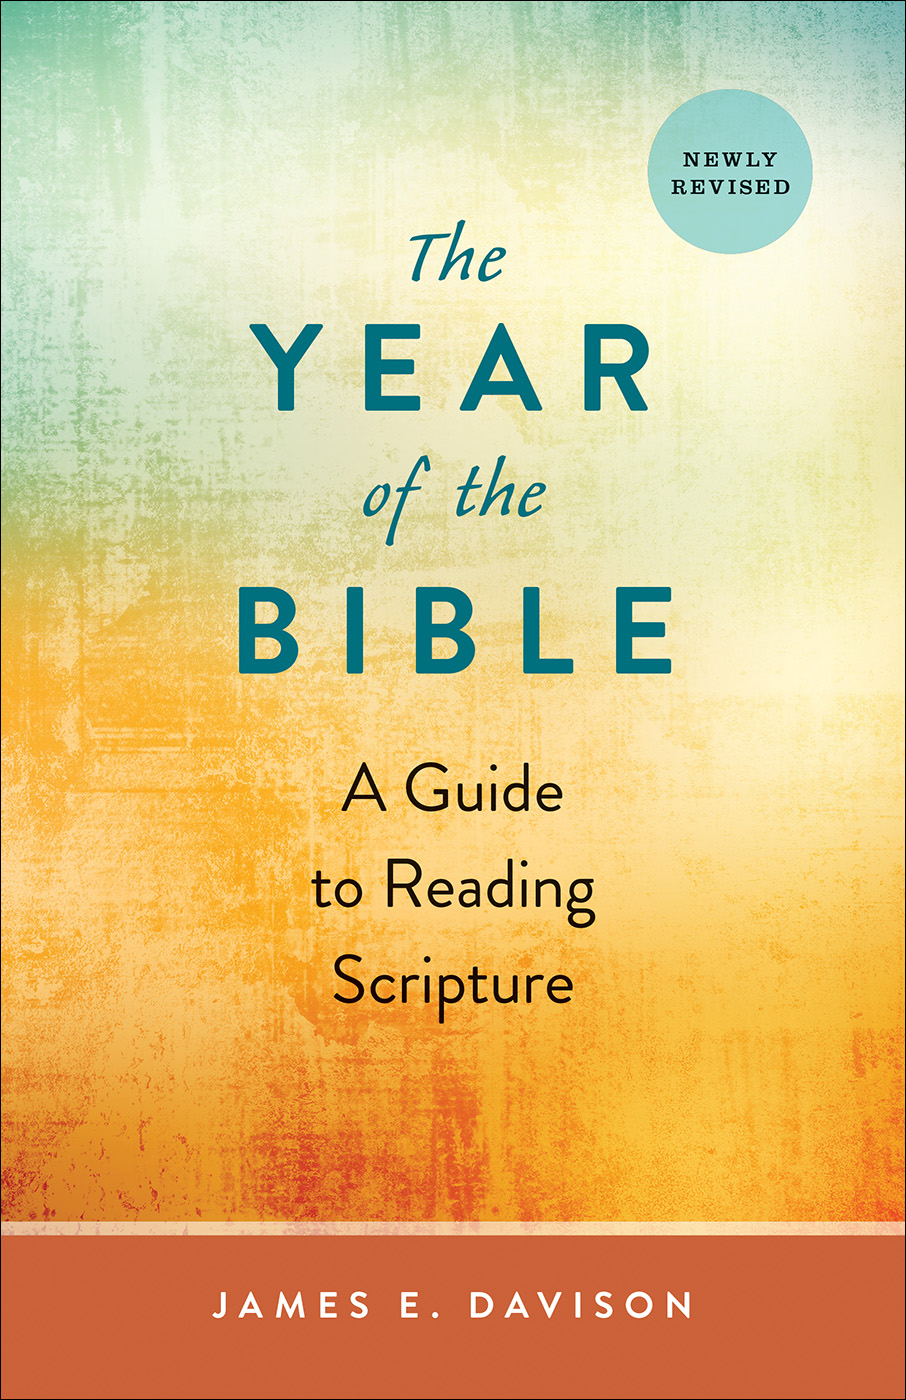 The Year of the Bible